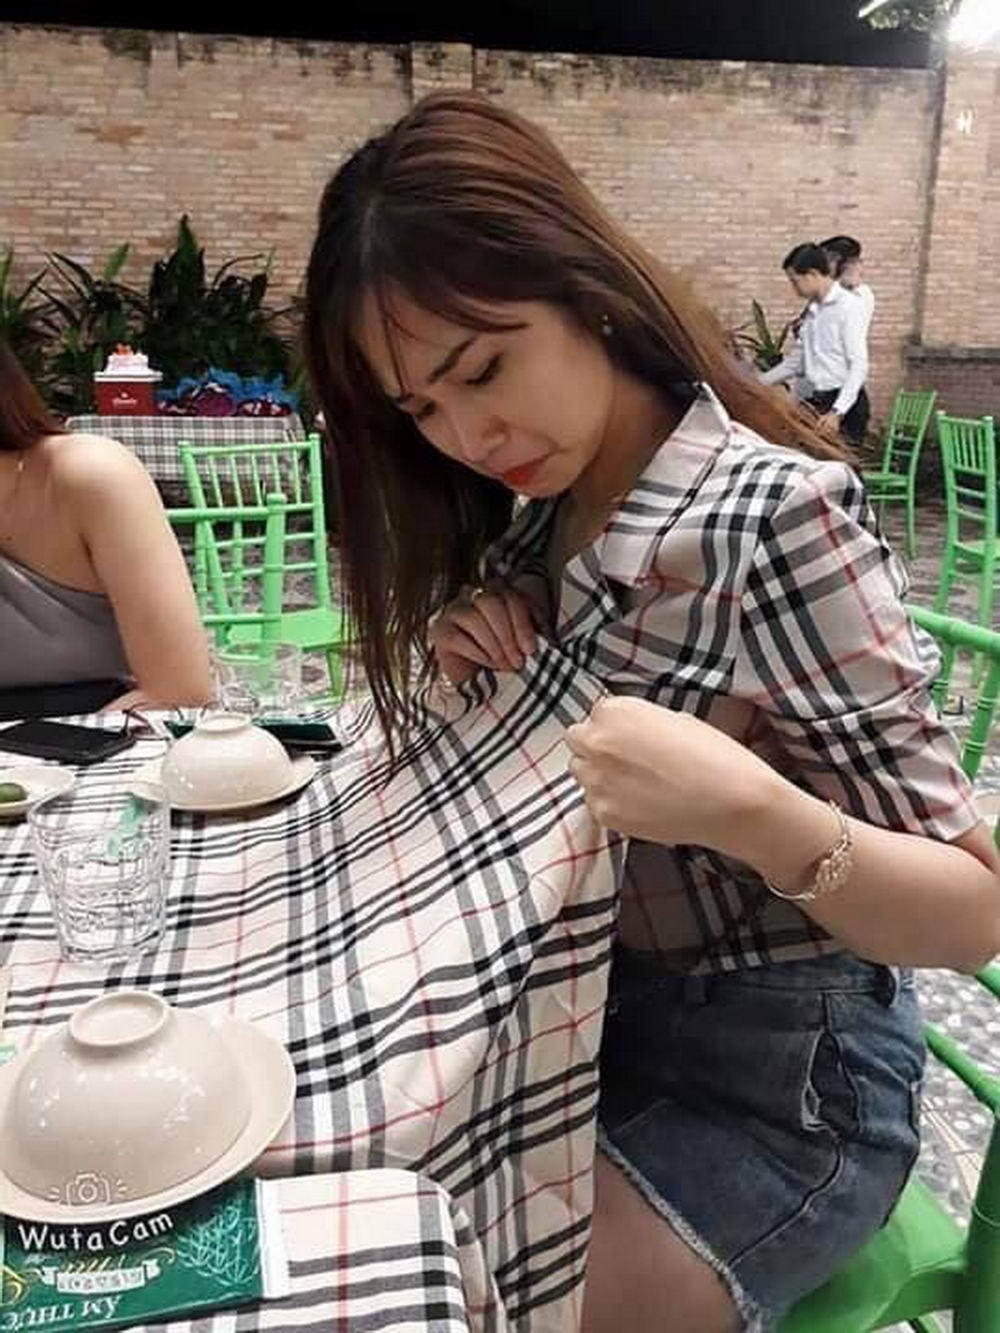 when the blouse matches the table clothe